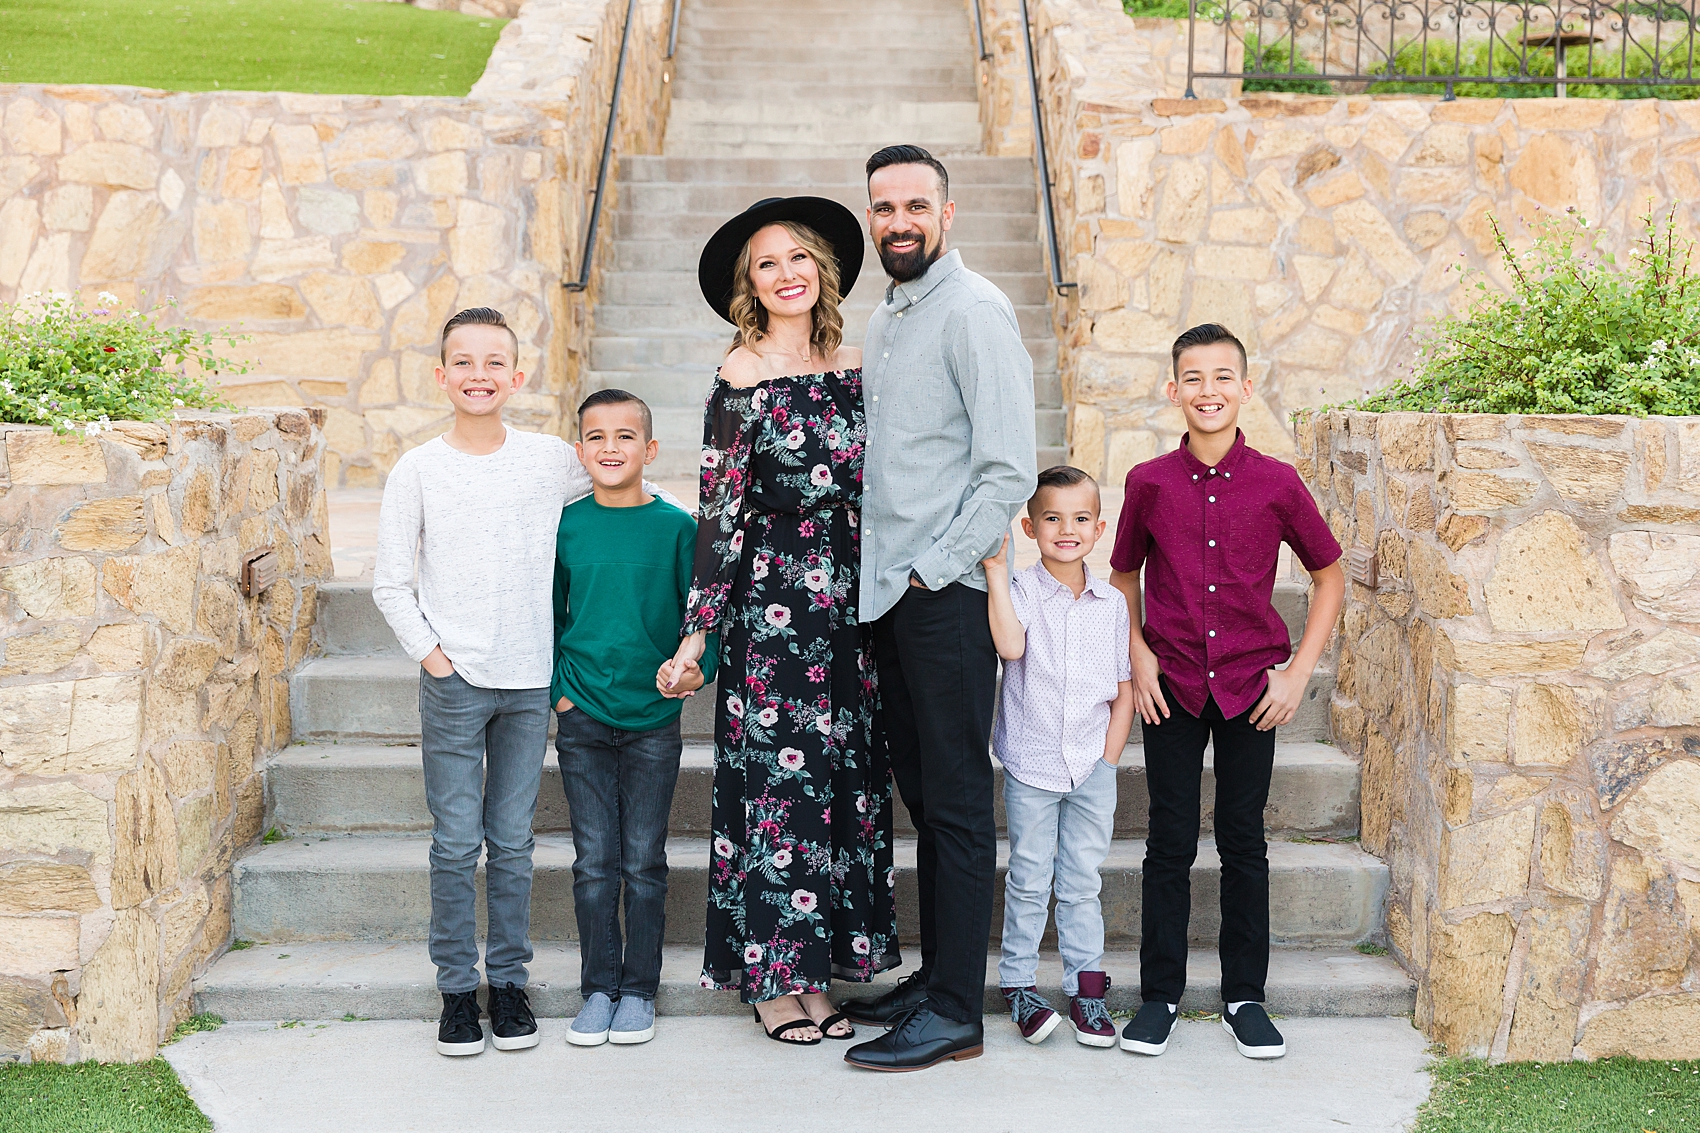 Leah Hope Photography | Scottsdale Phoenix Arizona | Wrigley Mansion | Mediterranean Architecture | Family Pictures | What to Wear | Family Poses | Child Photos